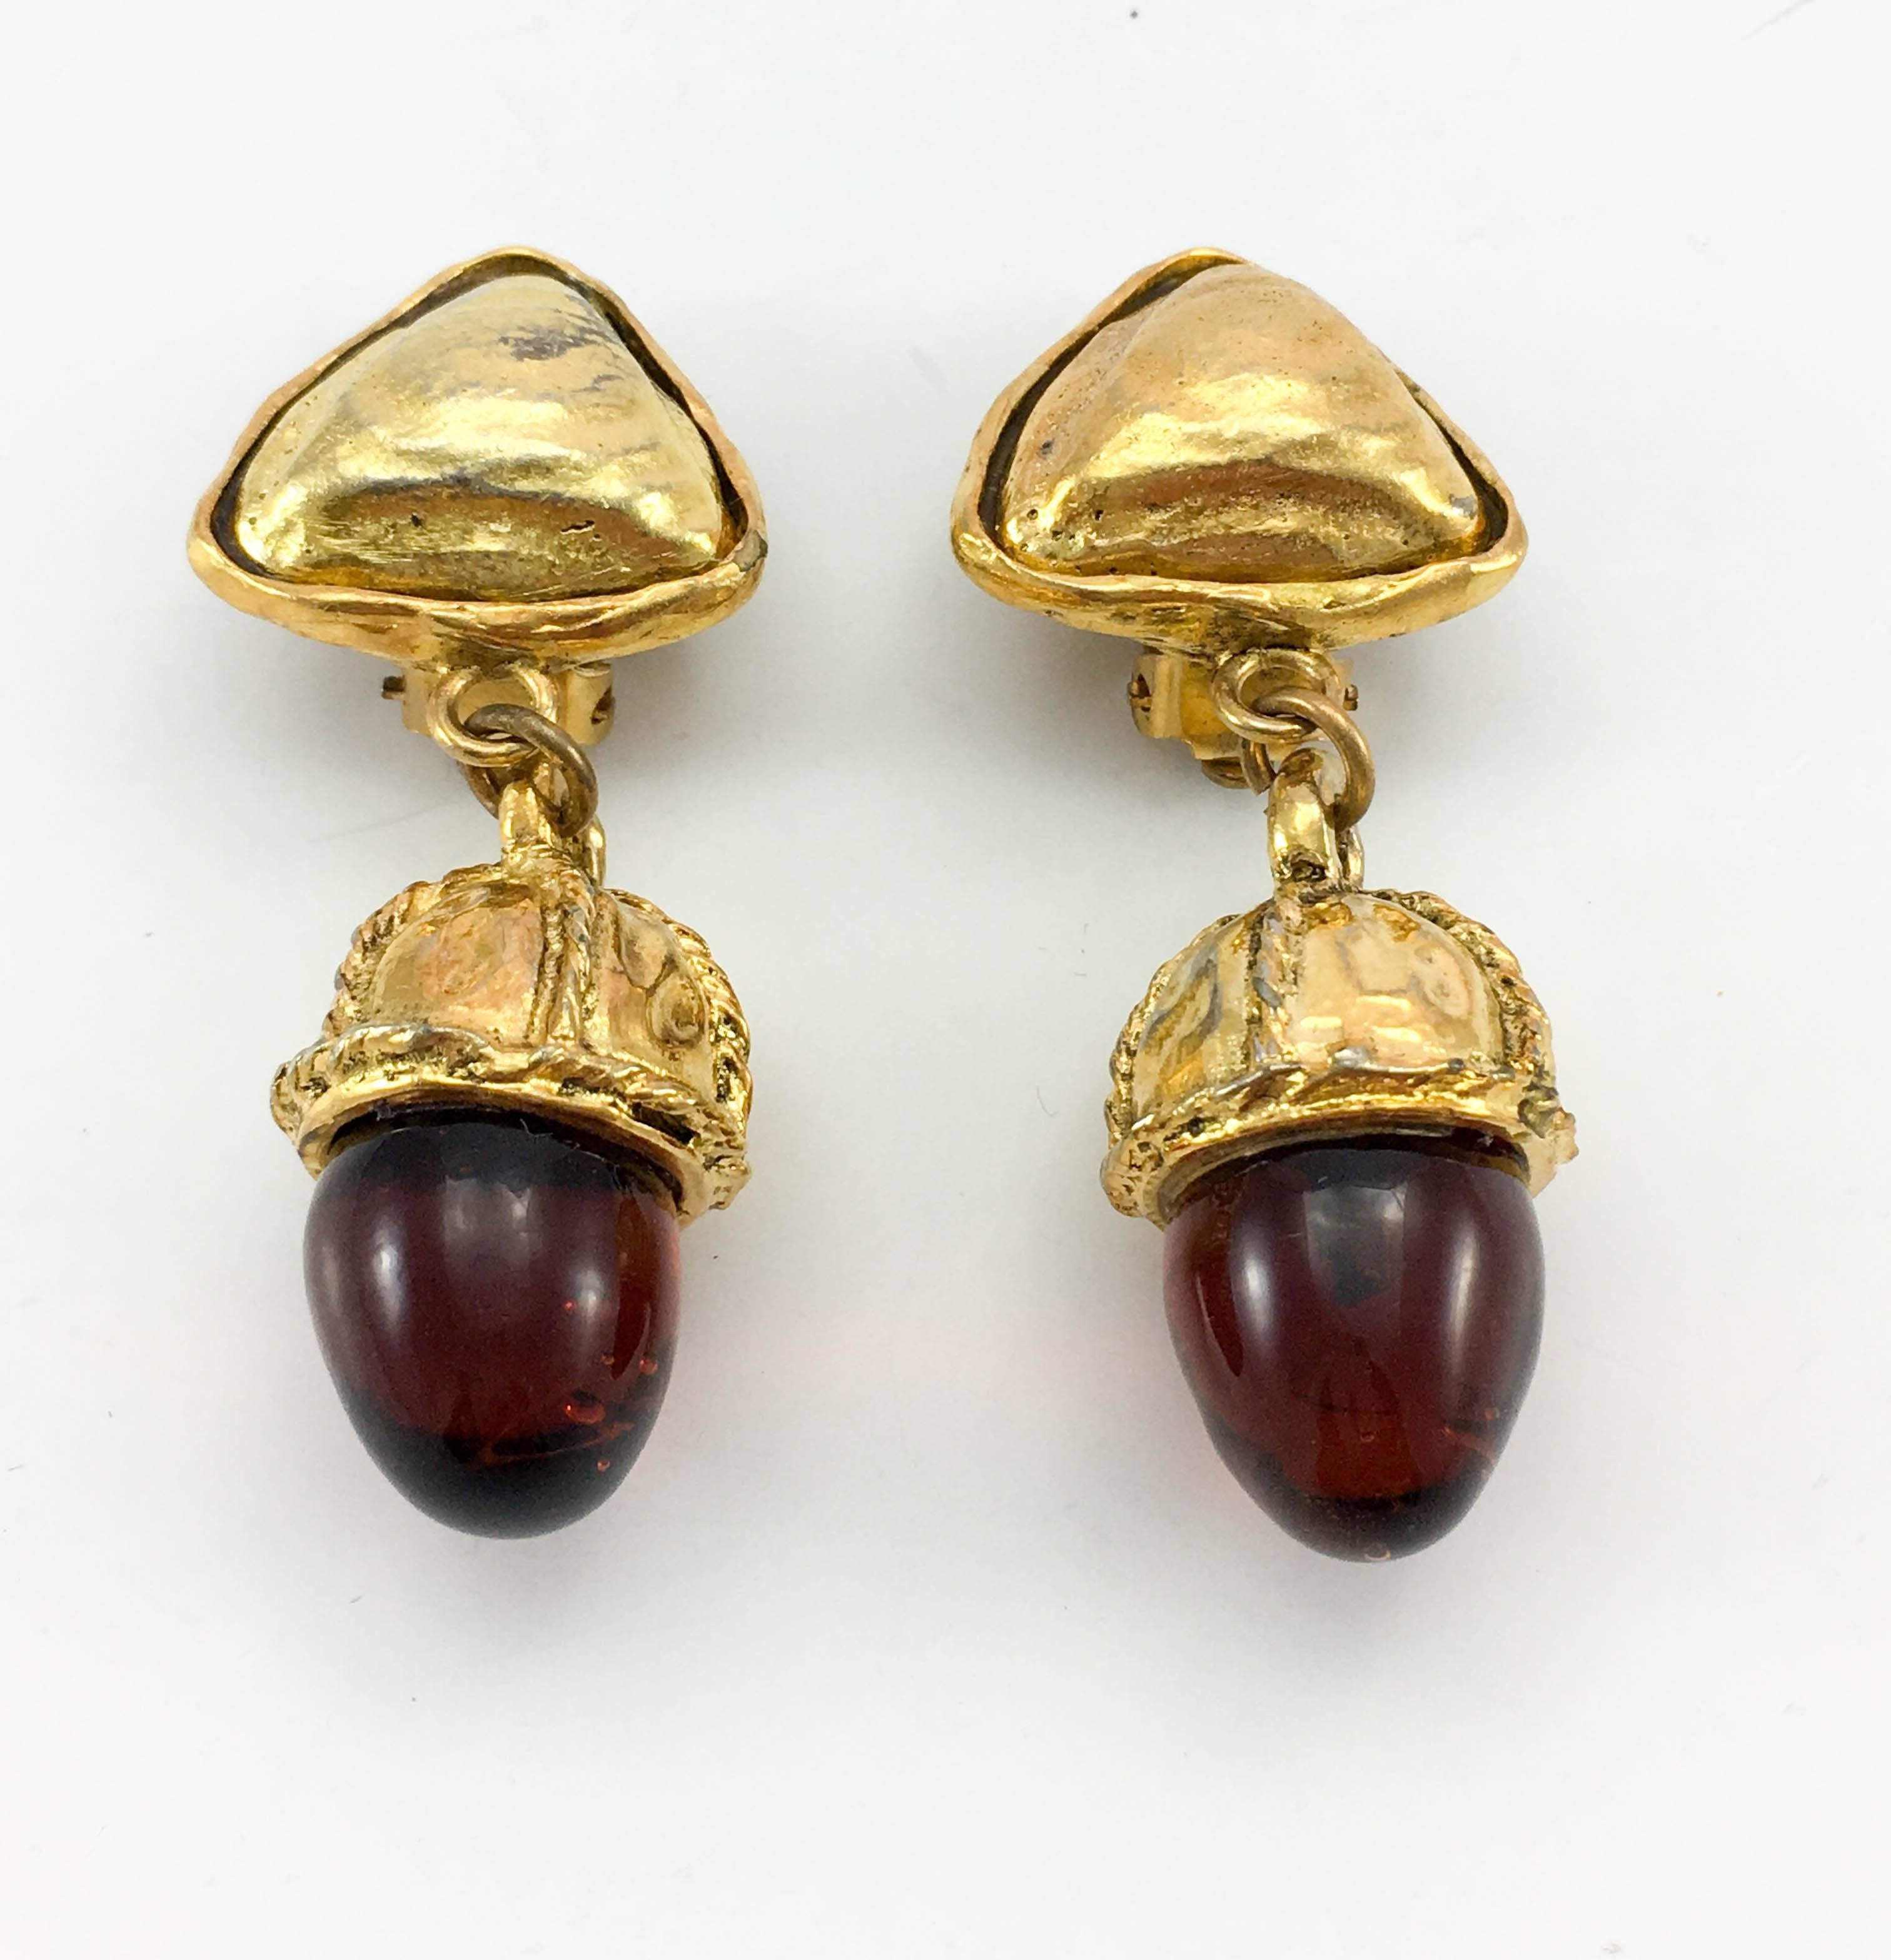 Vintage Chanel Red Gripoix Acorn Dangling Gilt Clip-On Earrings. These striking earrings by Chanel date back from the 1970’s. The top part of the earring is a triangle with the acorn-like bottom part hanging from it. The metalwork has an organic